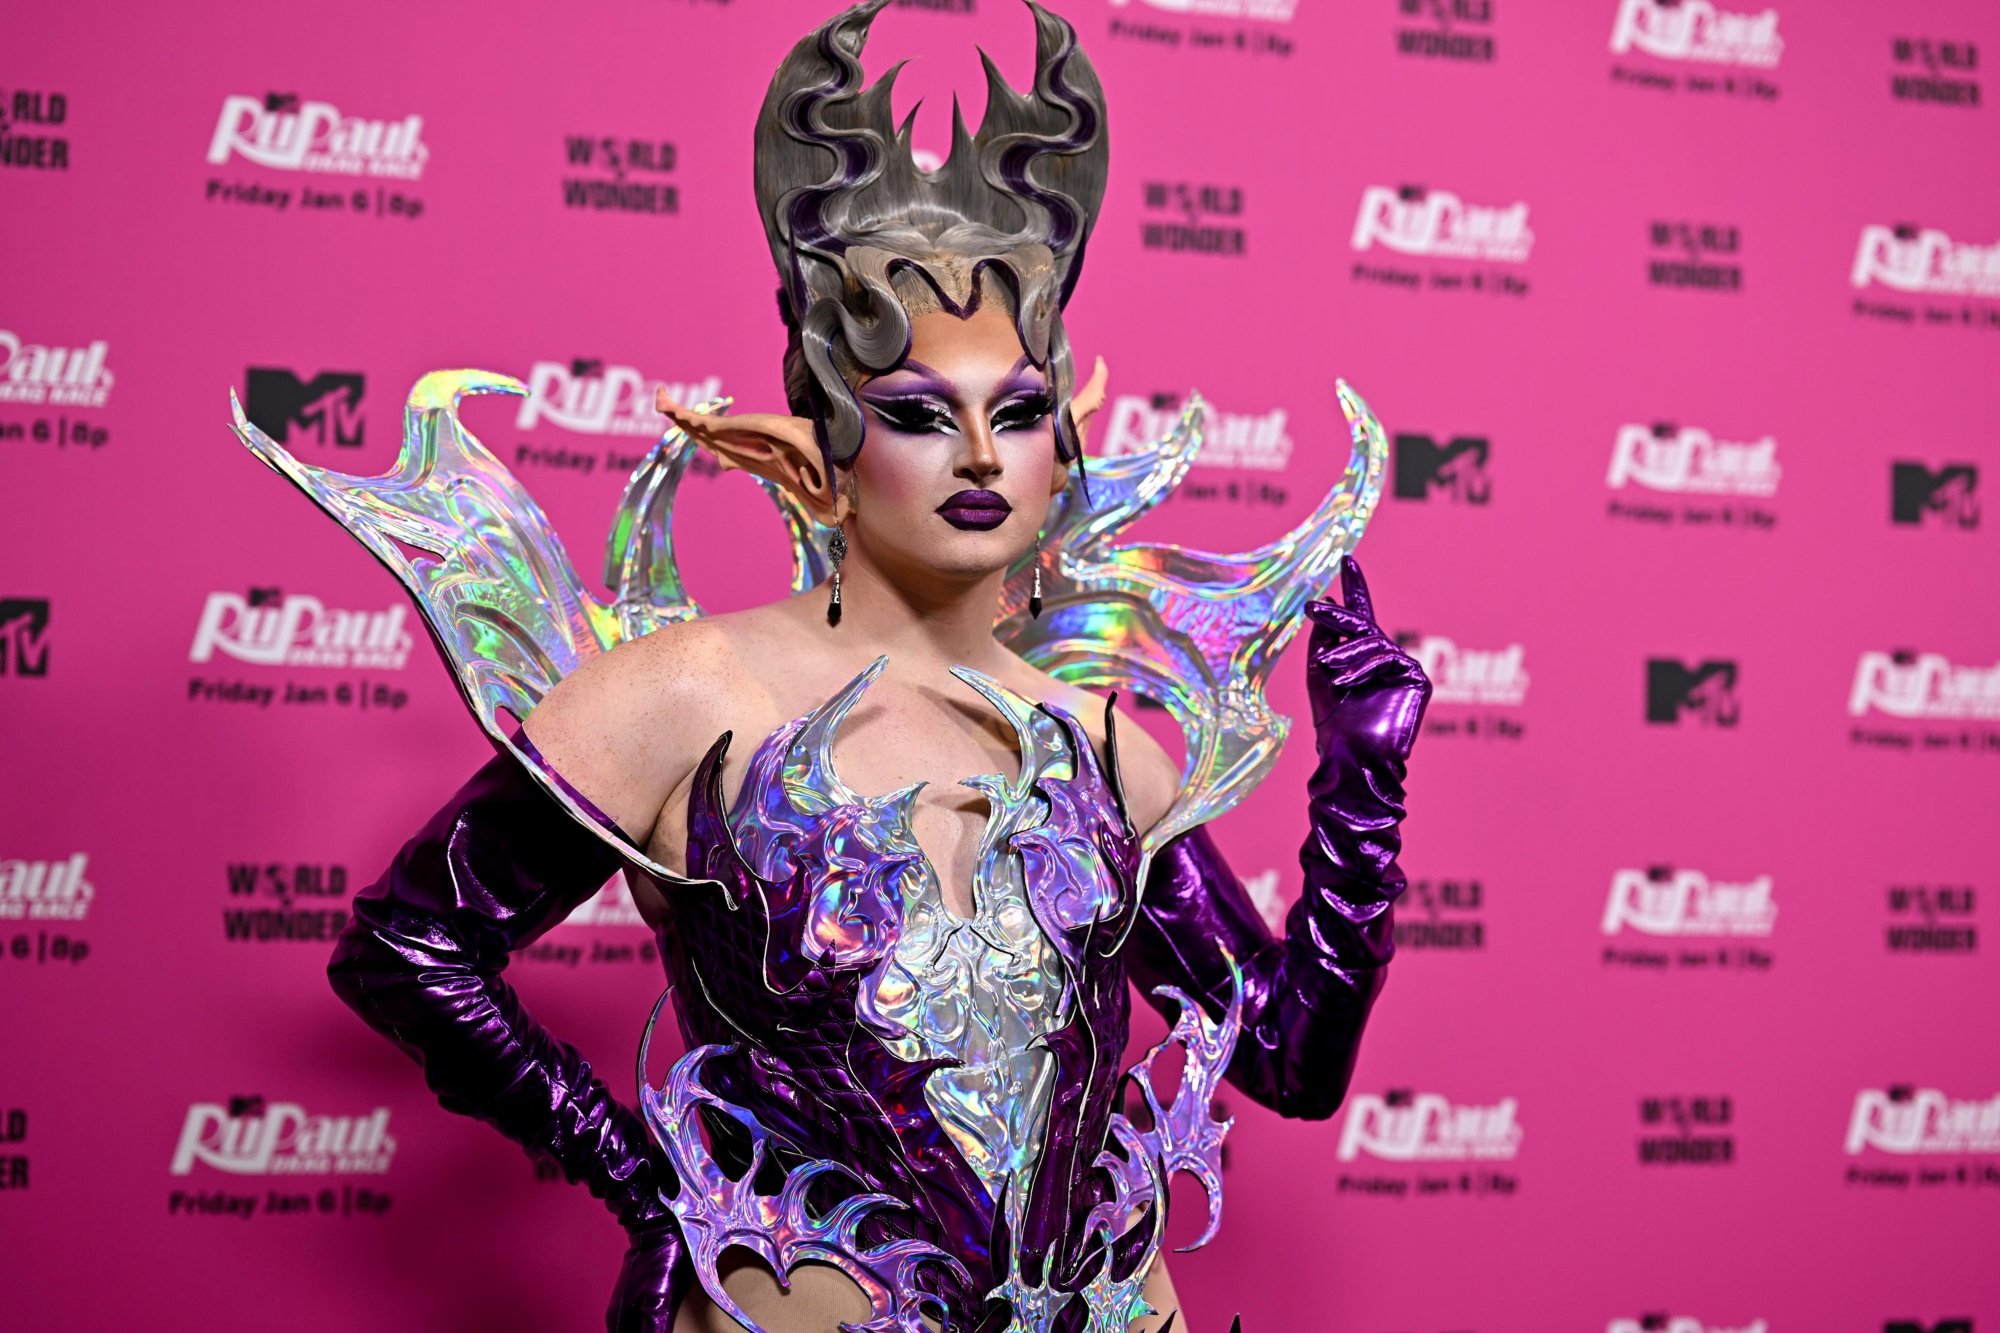 'RuPaul's Drag Race' Season 15 Irene Dubois wearing a purple costume standing in front of a pink step and repeat